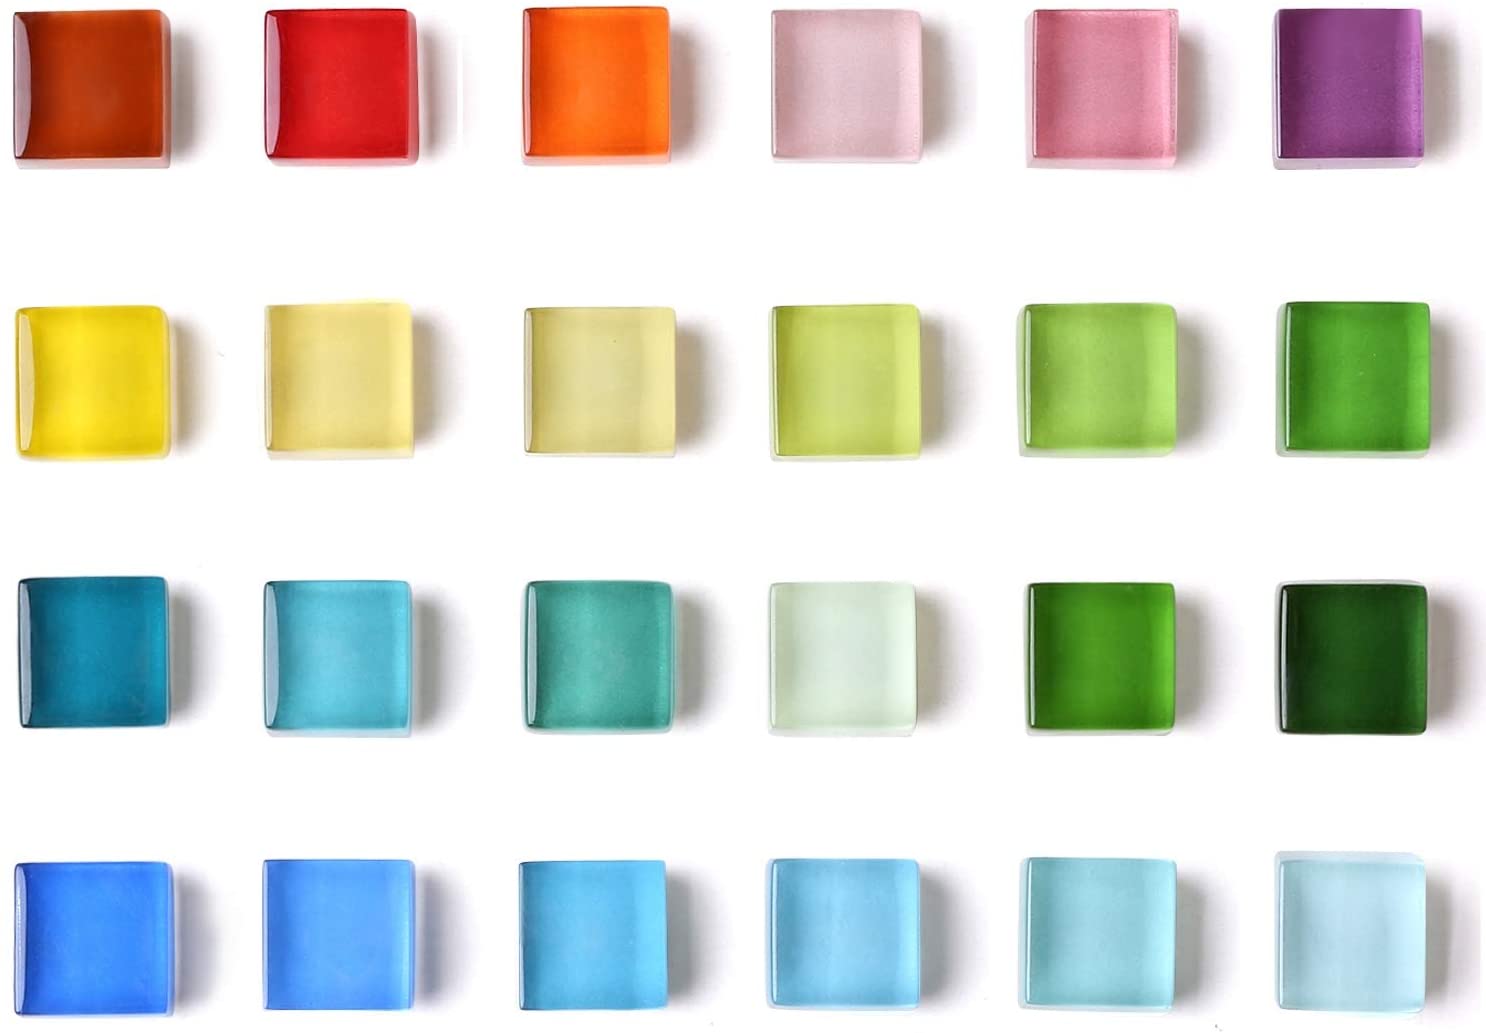 Mymazn Glass Squares Refrigerator Magnets, 24-Count